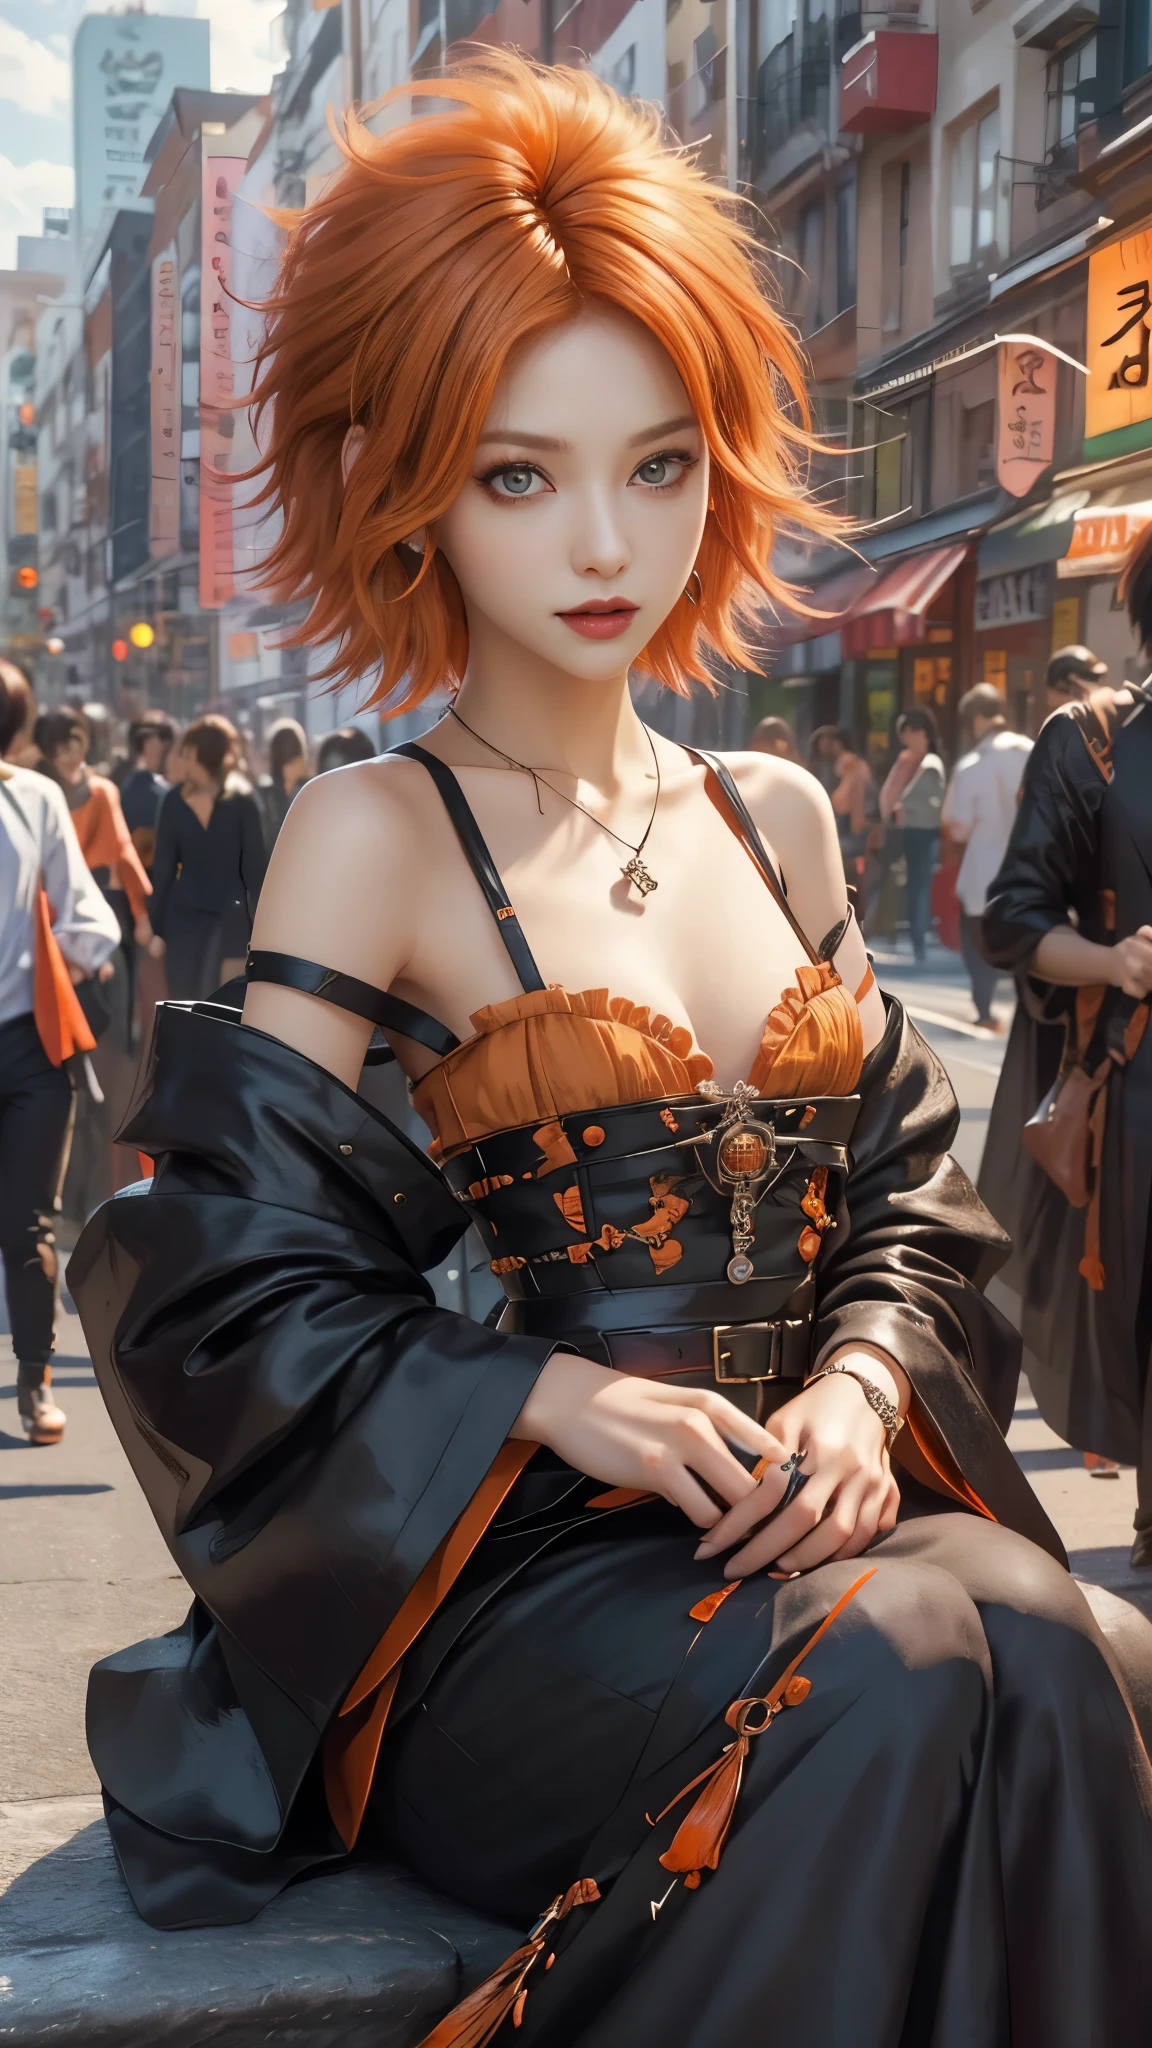 ​masterpiece, top-quality, ((1womanl)), different orange color, finely eye and detailed face, intricate detailes, Casual black and orange attire, window, A smile, Happiness, tenderness, high-level image quality、selfee, Beautuful Women、tall、a small face, D-cups, The upper part of the body、nightfall, nighttime scene、𝓡𝓸𝓶𝓪𝓷𝓽𝓲𝓬、Korea person, Idol Photos, Model photo, k pop, Professional Photos, Vampires, Korean fashion in black and orange, Fedoman with necklace, inspired by Sim Sa-jeong, androgynous vampire, :9 detailed face: 8, extra detailed face, detailed punk hair, ((eyes are deialed)) baggy eyes, Seductive. Highly detailed, semi realistic anime, Vampires, hyperrealistic teen, Delicate androgynous princess, imvu, ((short hair woman)), orange hair woman with wild look, ((Woman with short orange hair)), ((1 persons)), sitting,